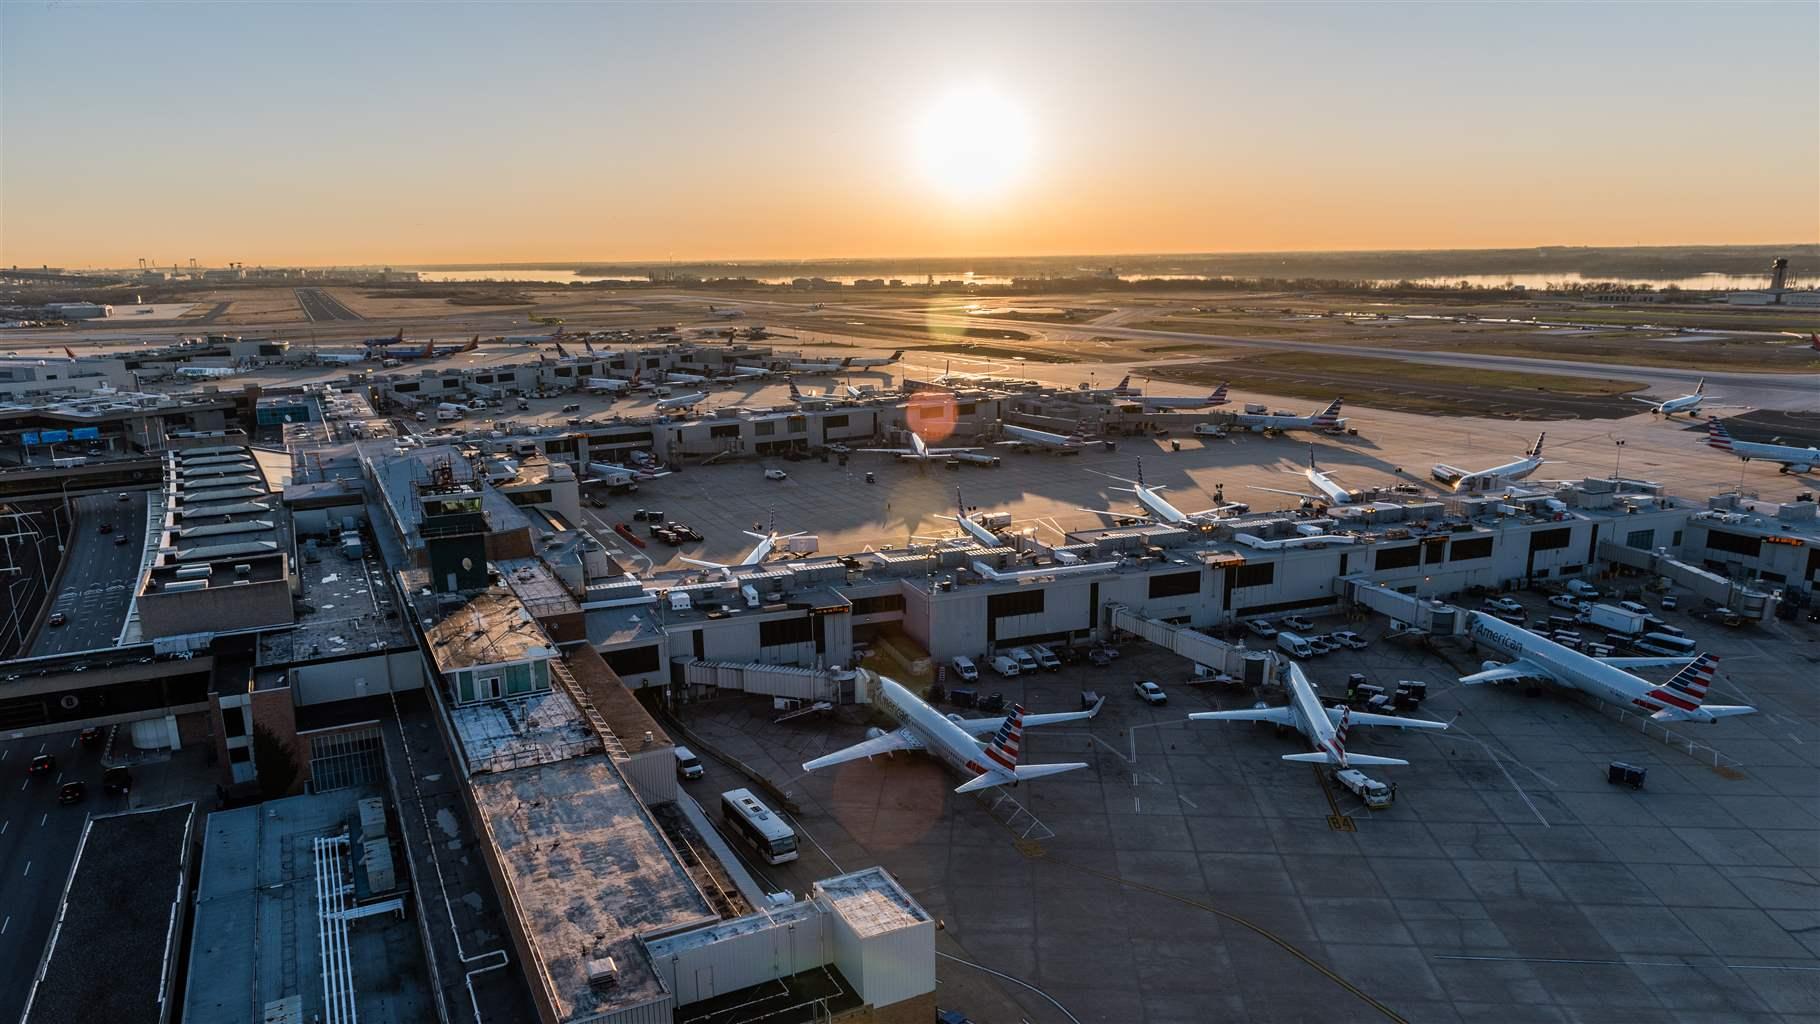 A bird’s-eye view of the city’s main airport, with several airplanes parked at its gates as the sun sits low in the sky. 